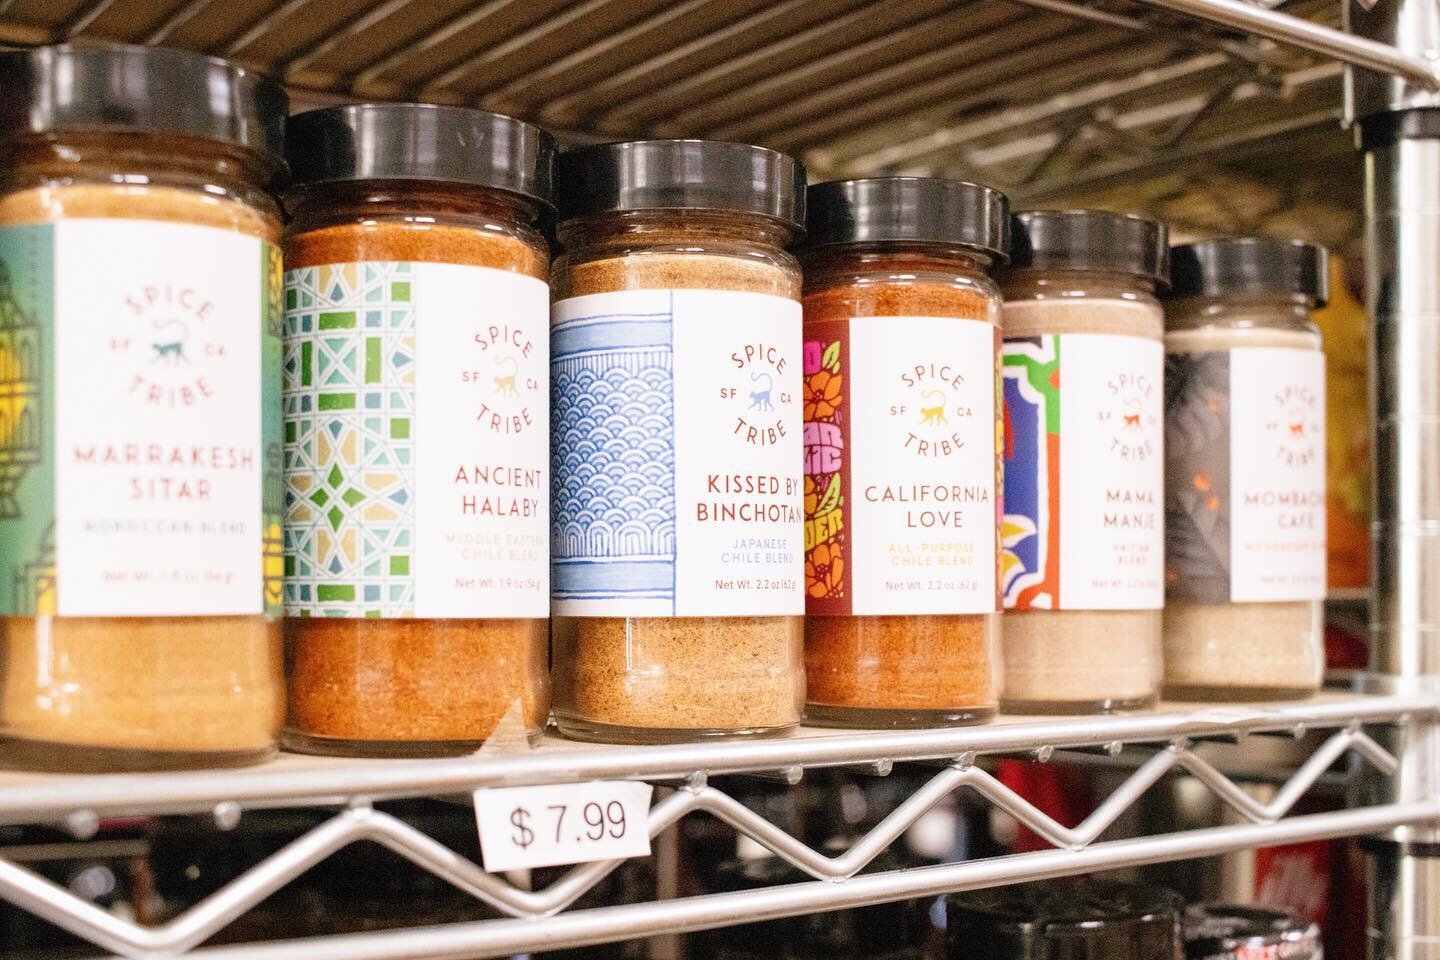 LOCAL BRAND WE LOVE: @spicetribe 🌶🌶 
Invite a world of flavor to your table with Spice Tribe&rsquo;s exceptional, travel-inspired seasonings.  We can&rsquo;t travel right now✈️, but your taste buds sure can with a little Spice Tribe zest&ndash; and